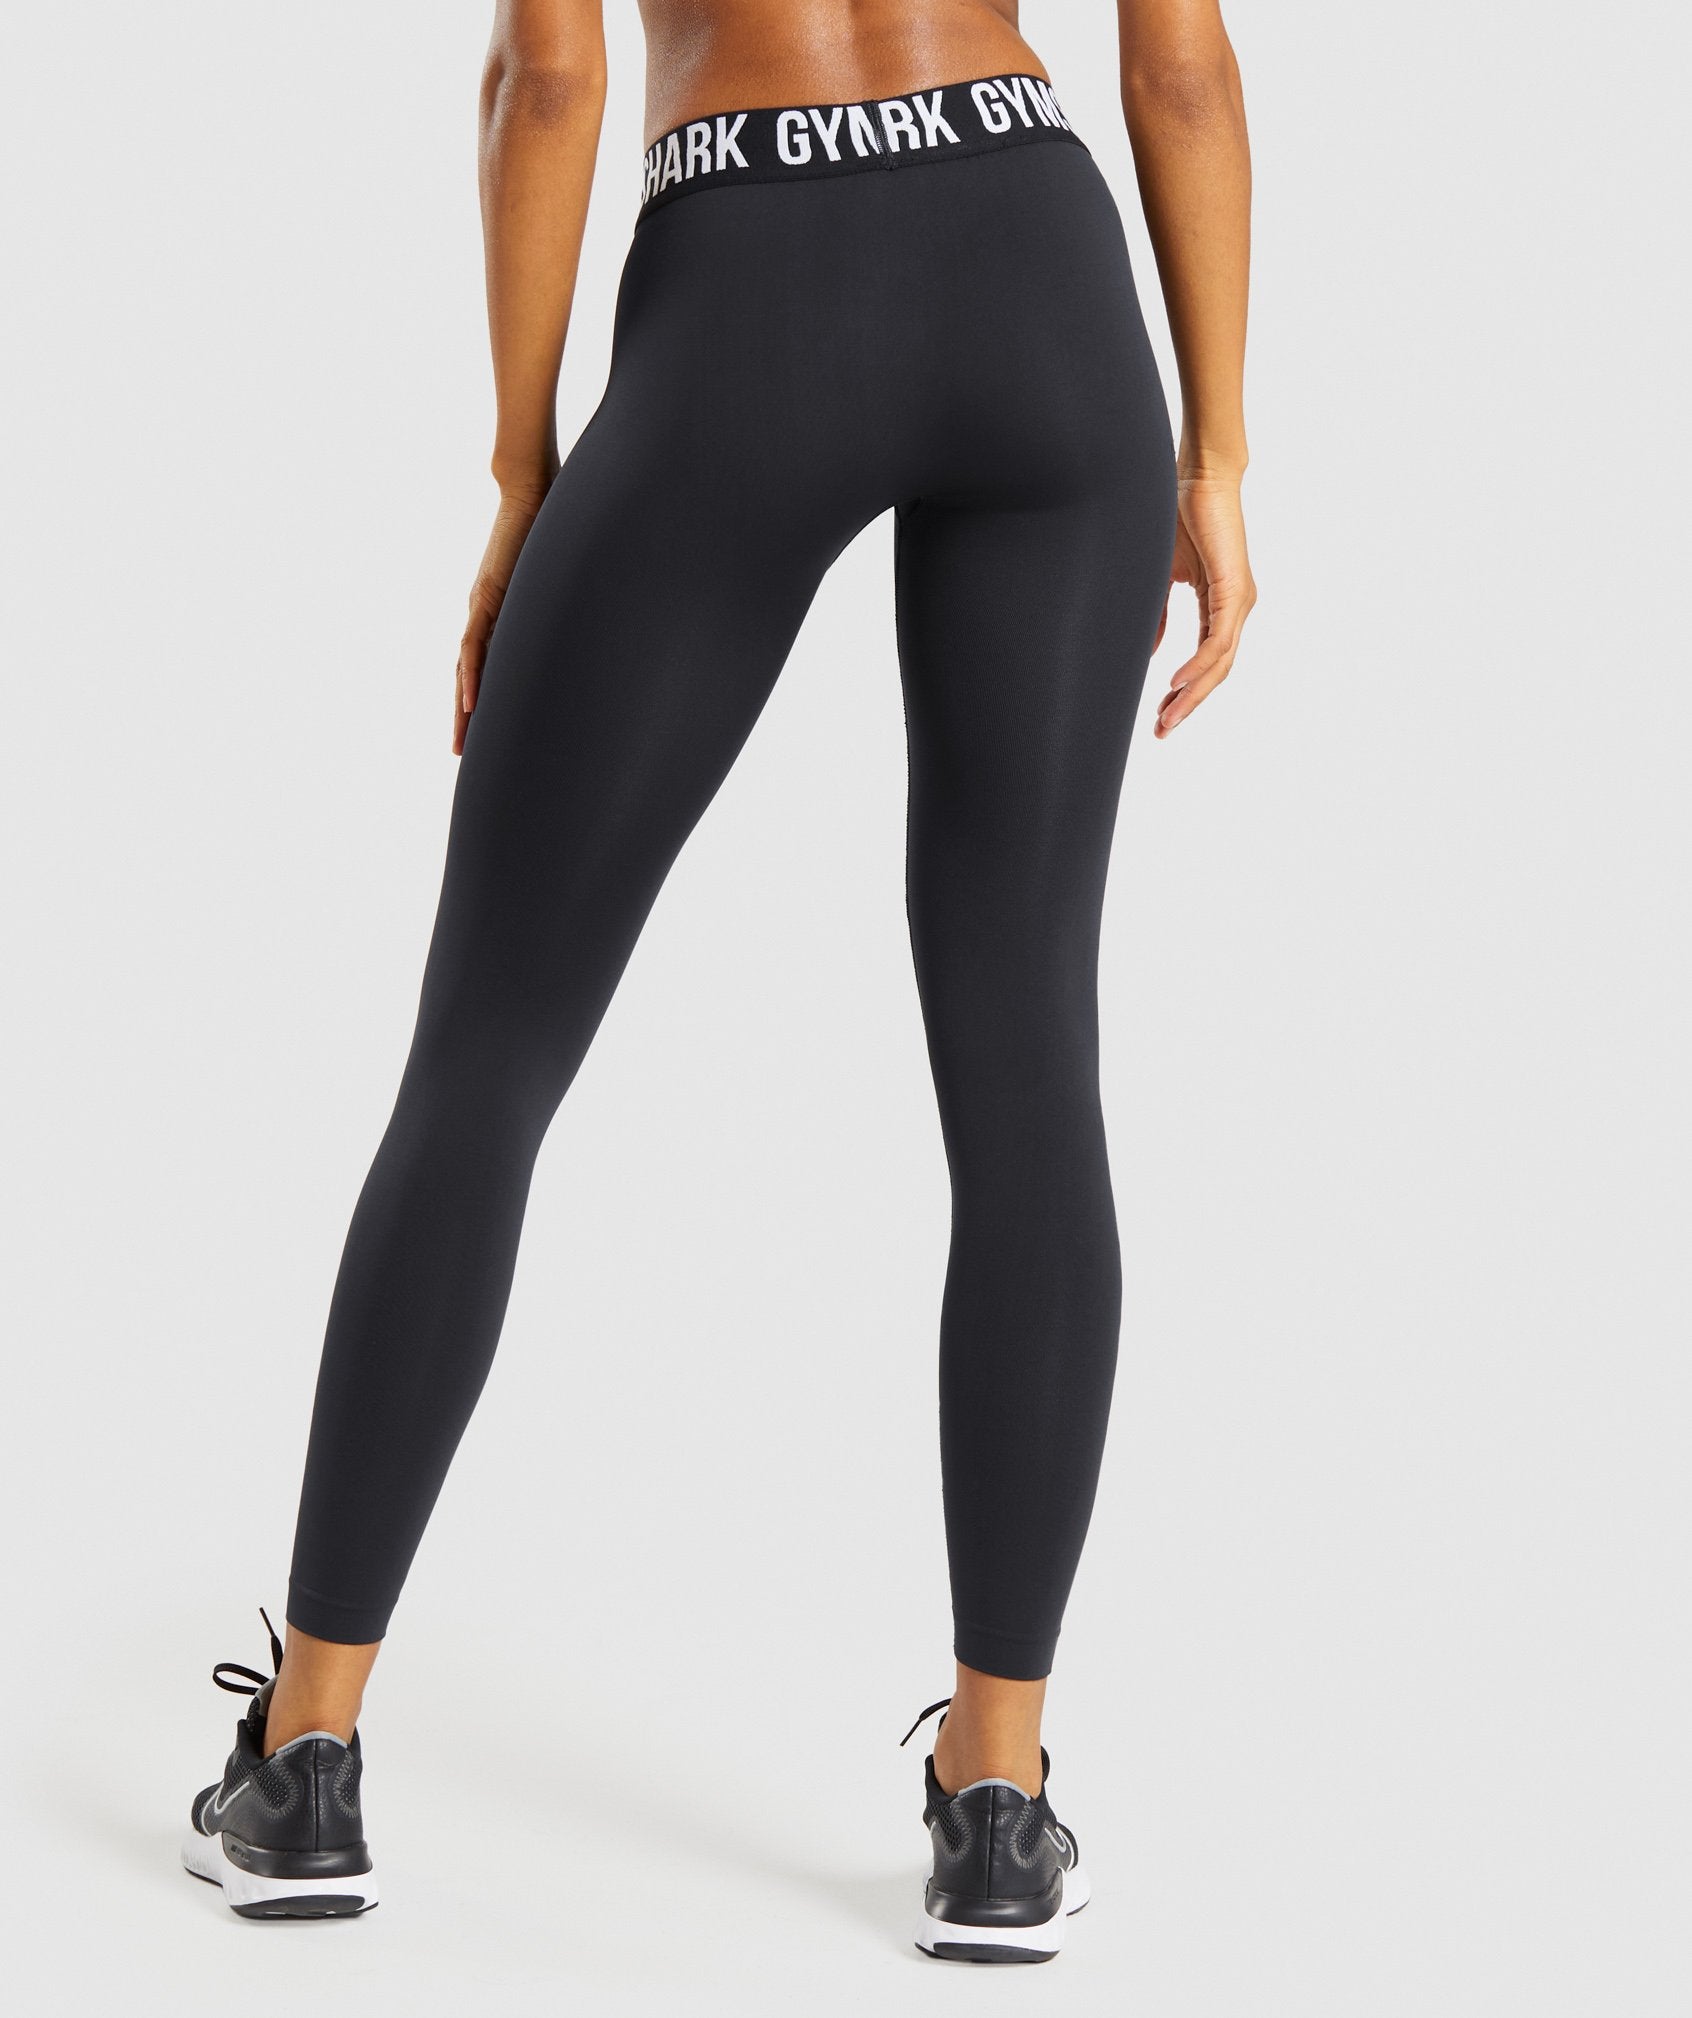 Fit Seamless Leggings in Black/White - view 2